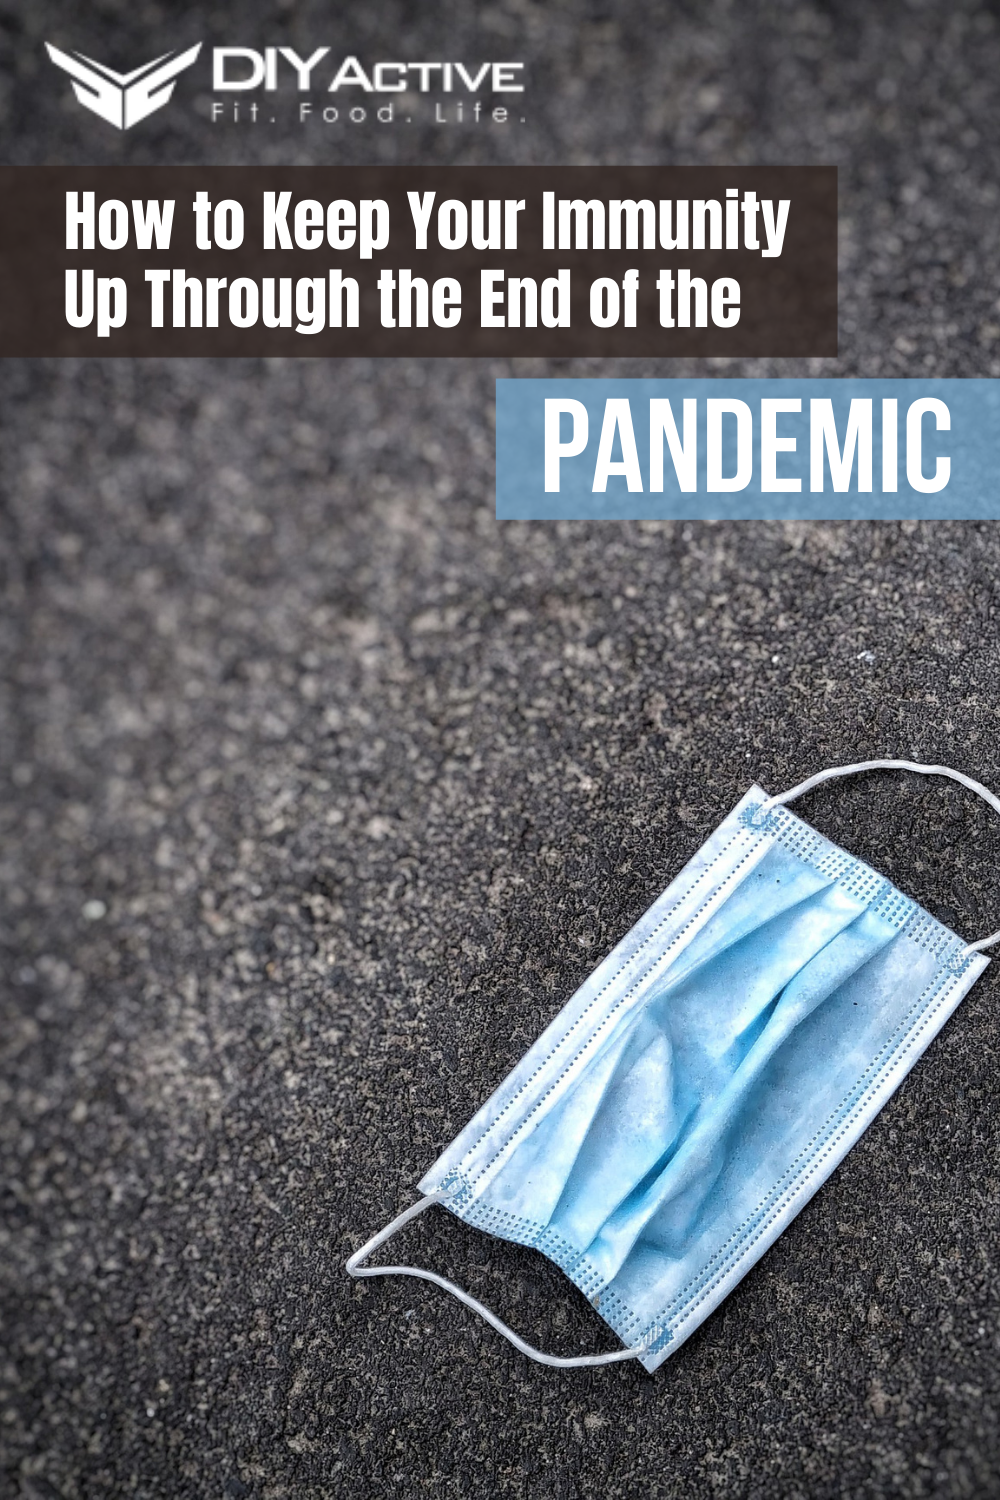 How to Keep Your Immunity Up Through the End of the Pandemic